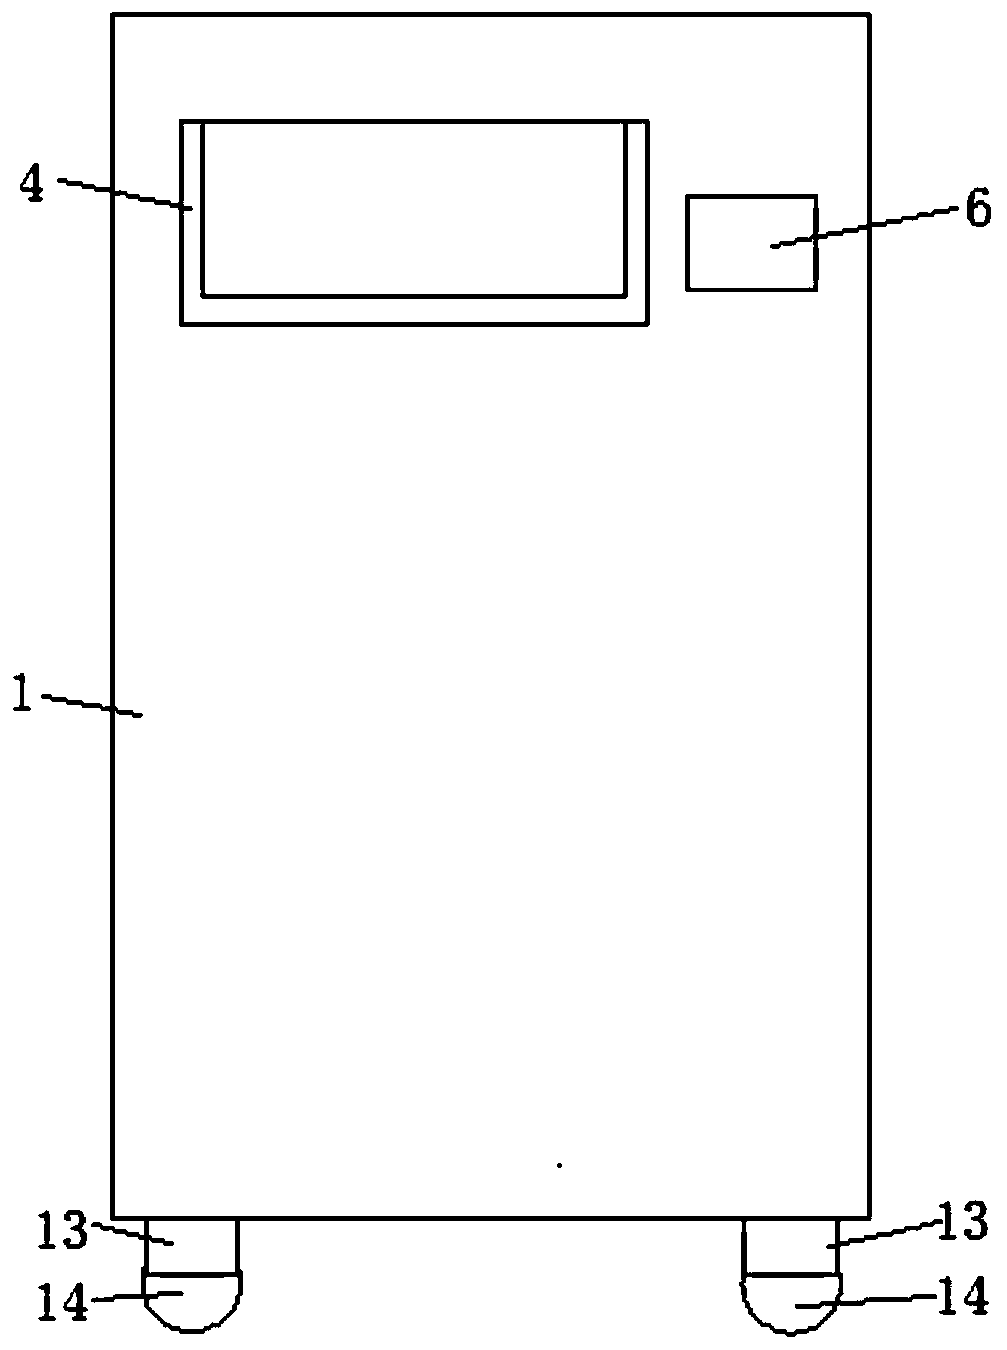 Paid recovery device for paper boxes